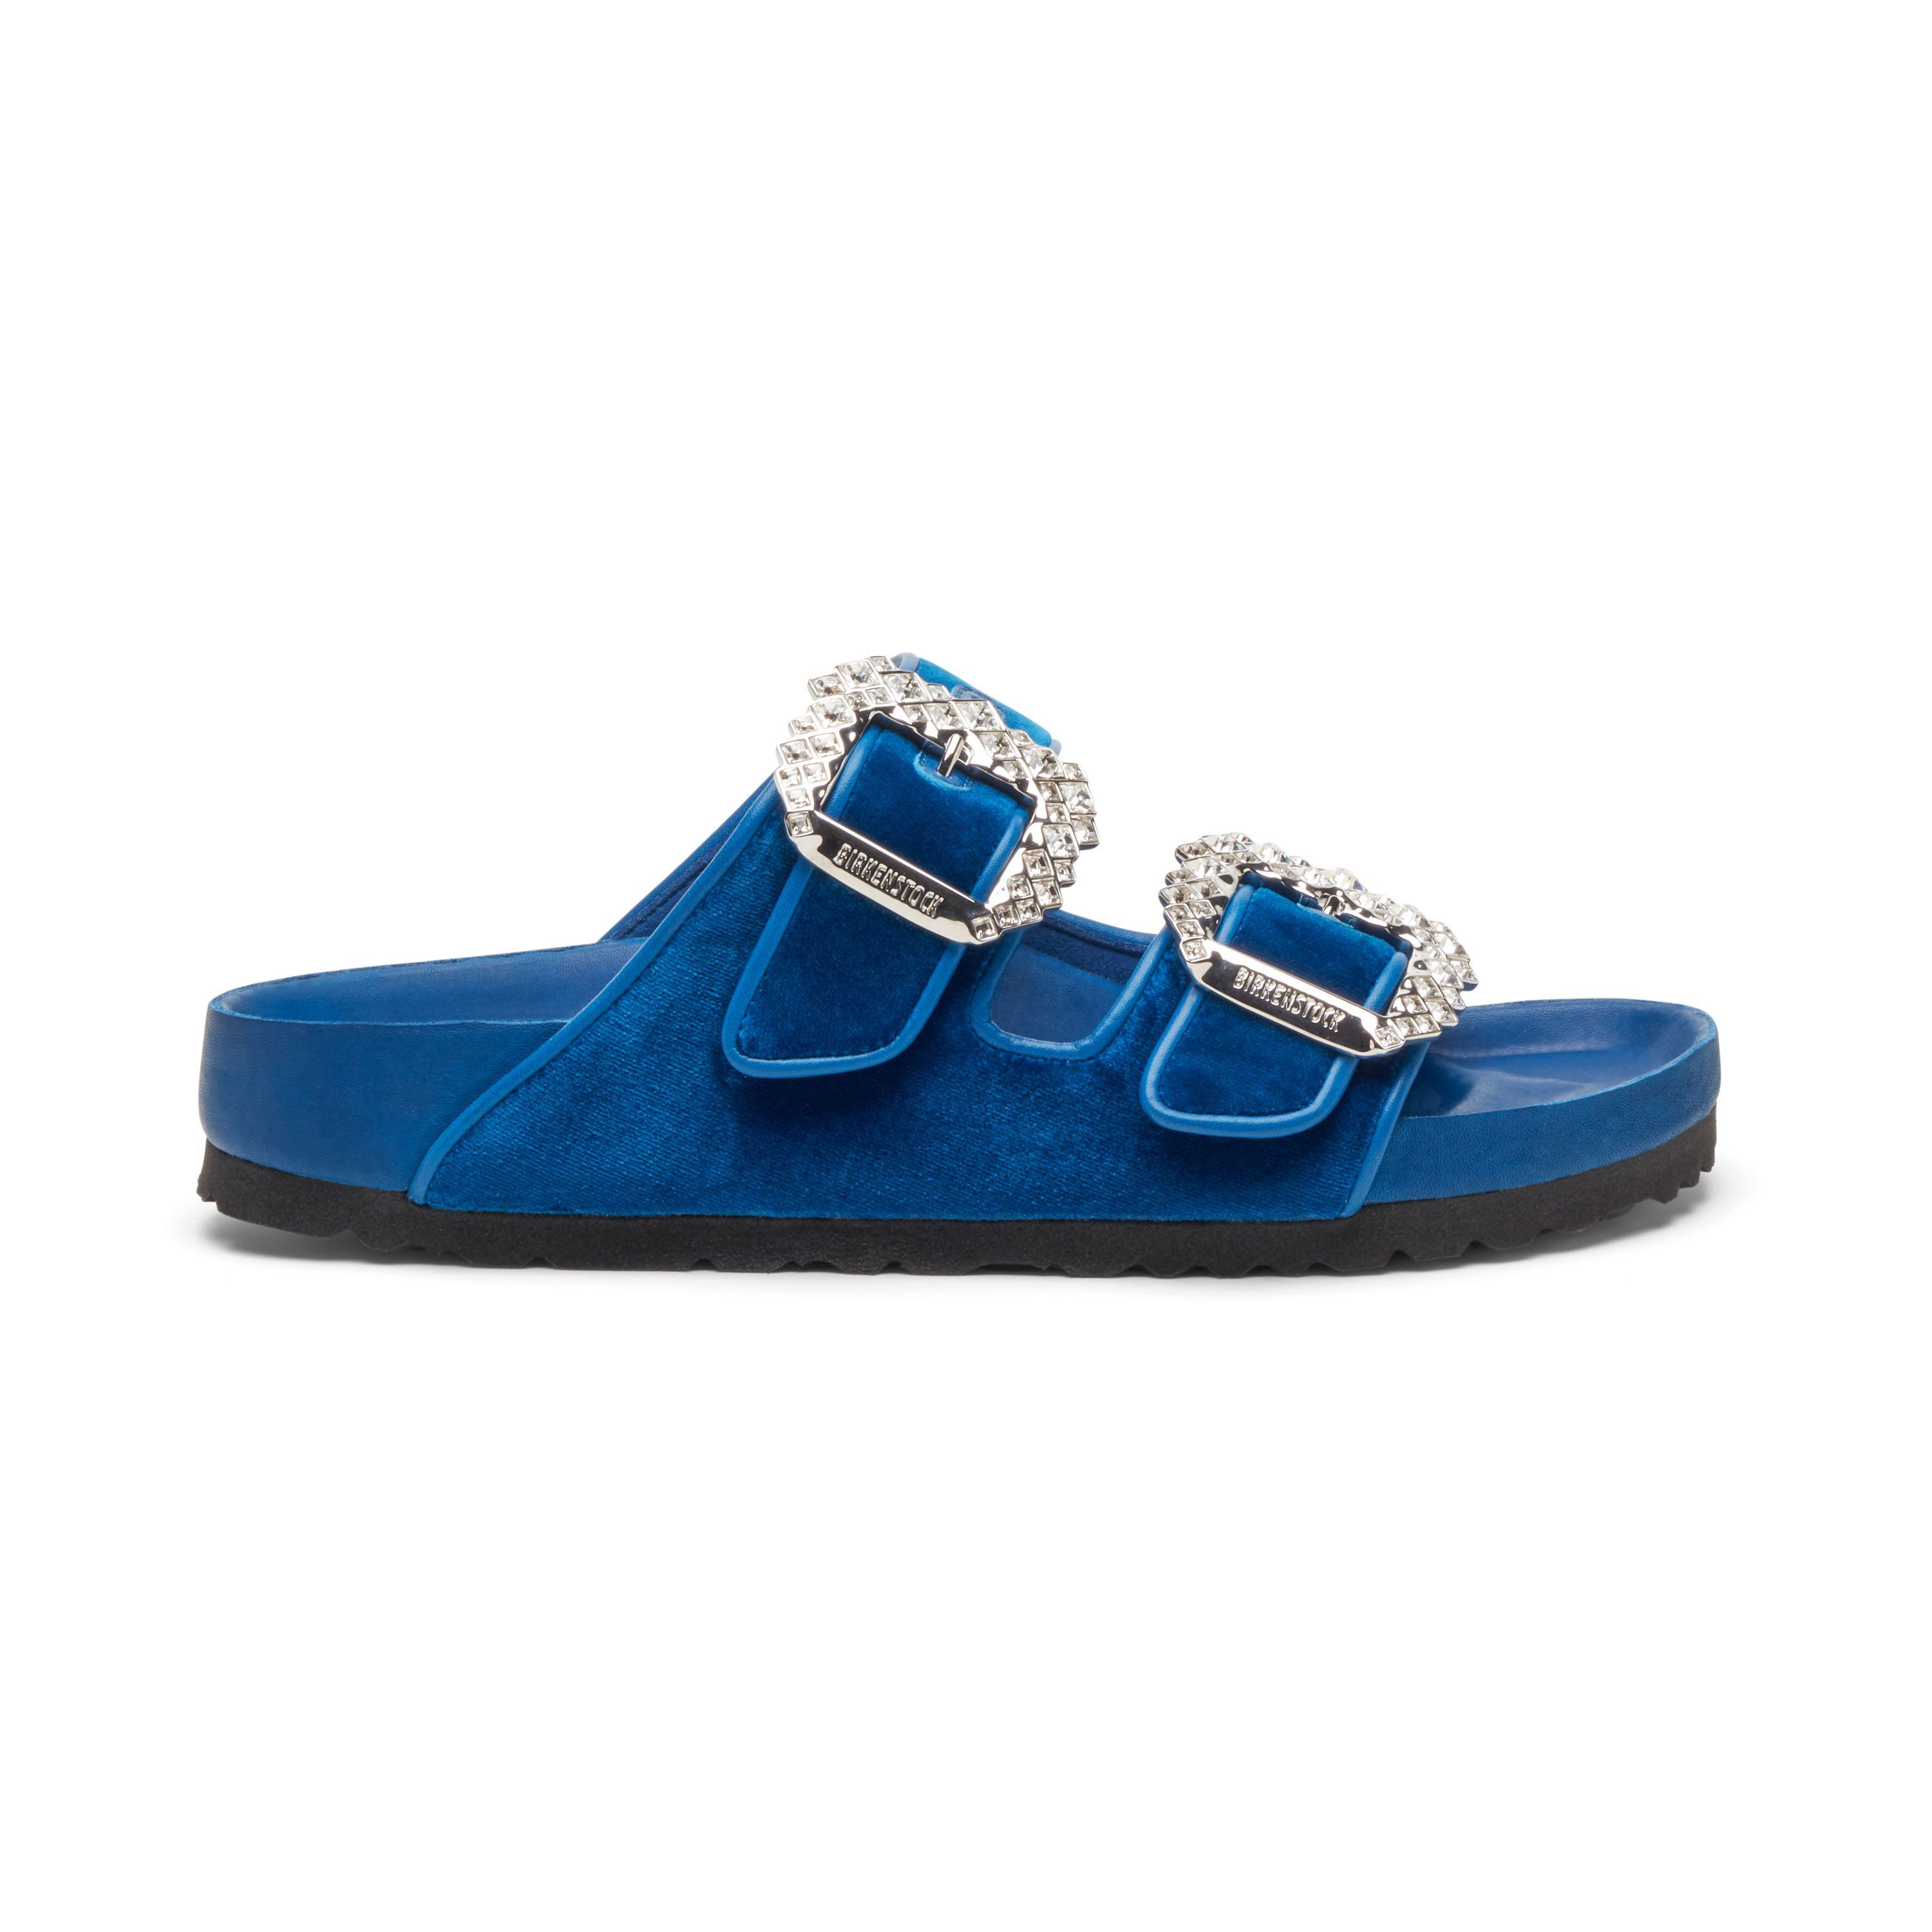 How to Secure Manolo Blahnik's New Birkenstock Collaboration